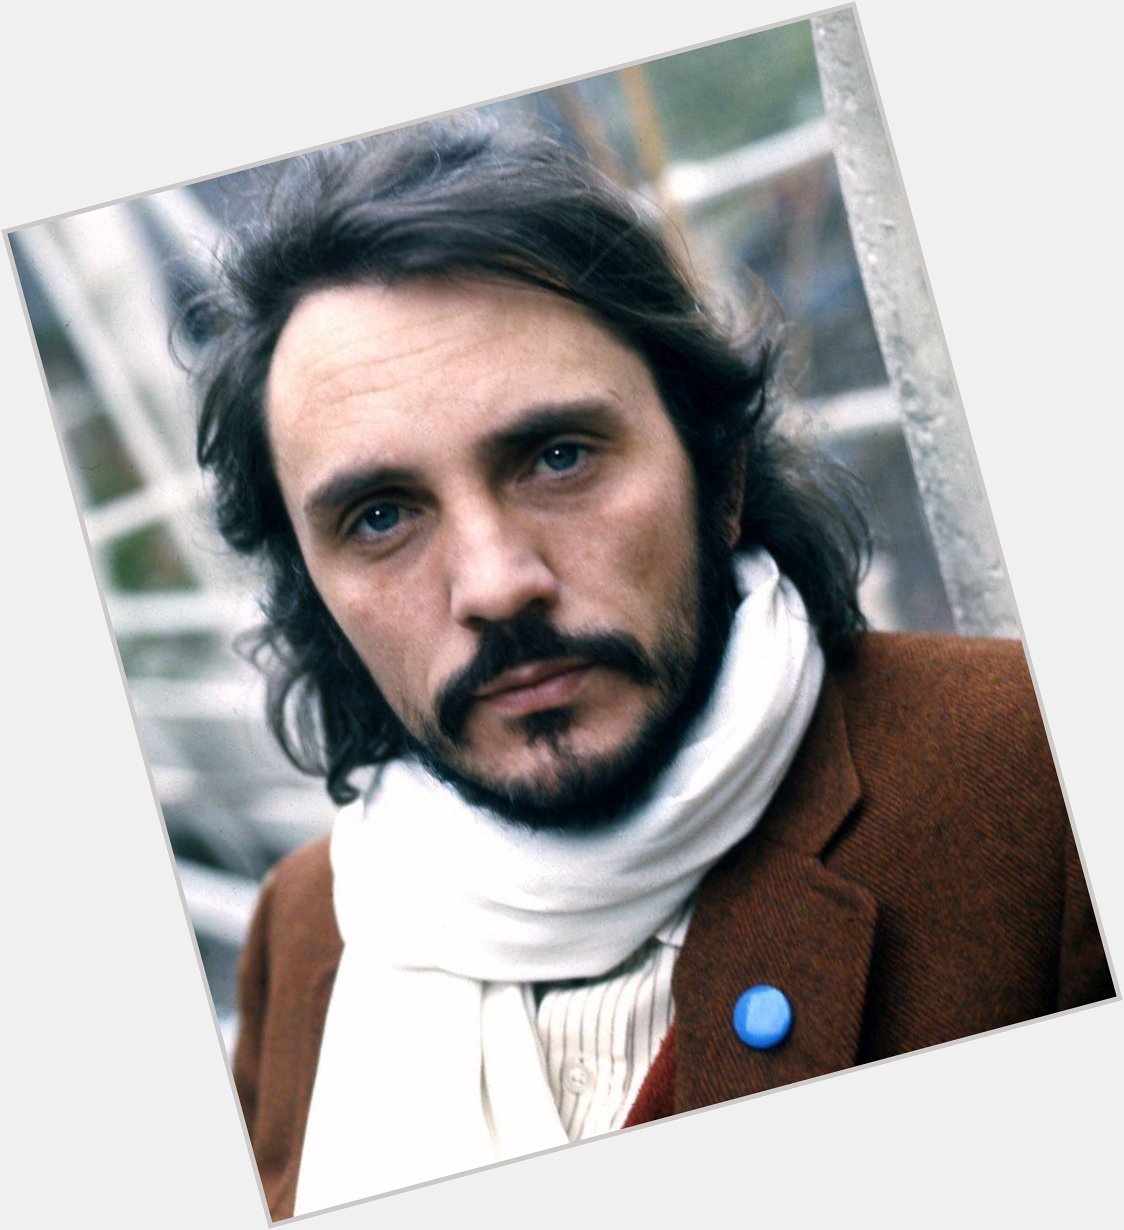 Happy Birthday to Terence Stamp who turns 81 today! 